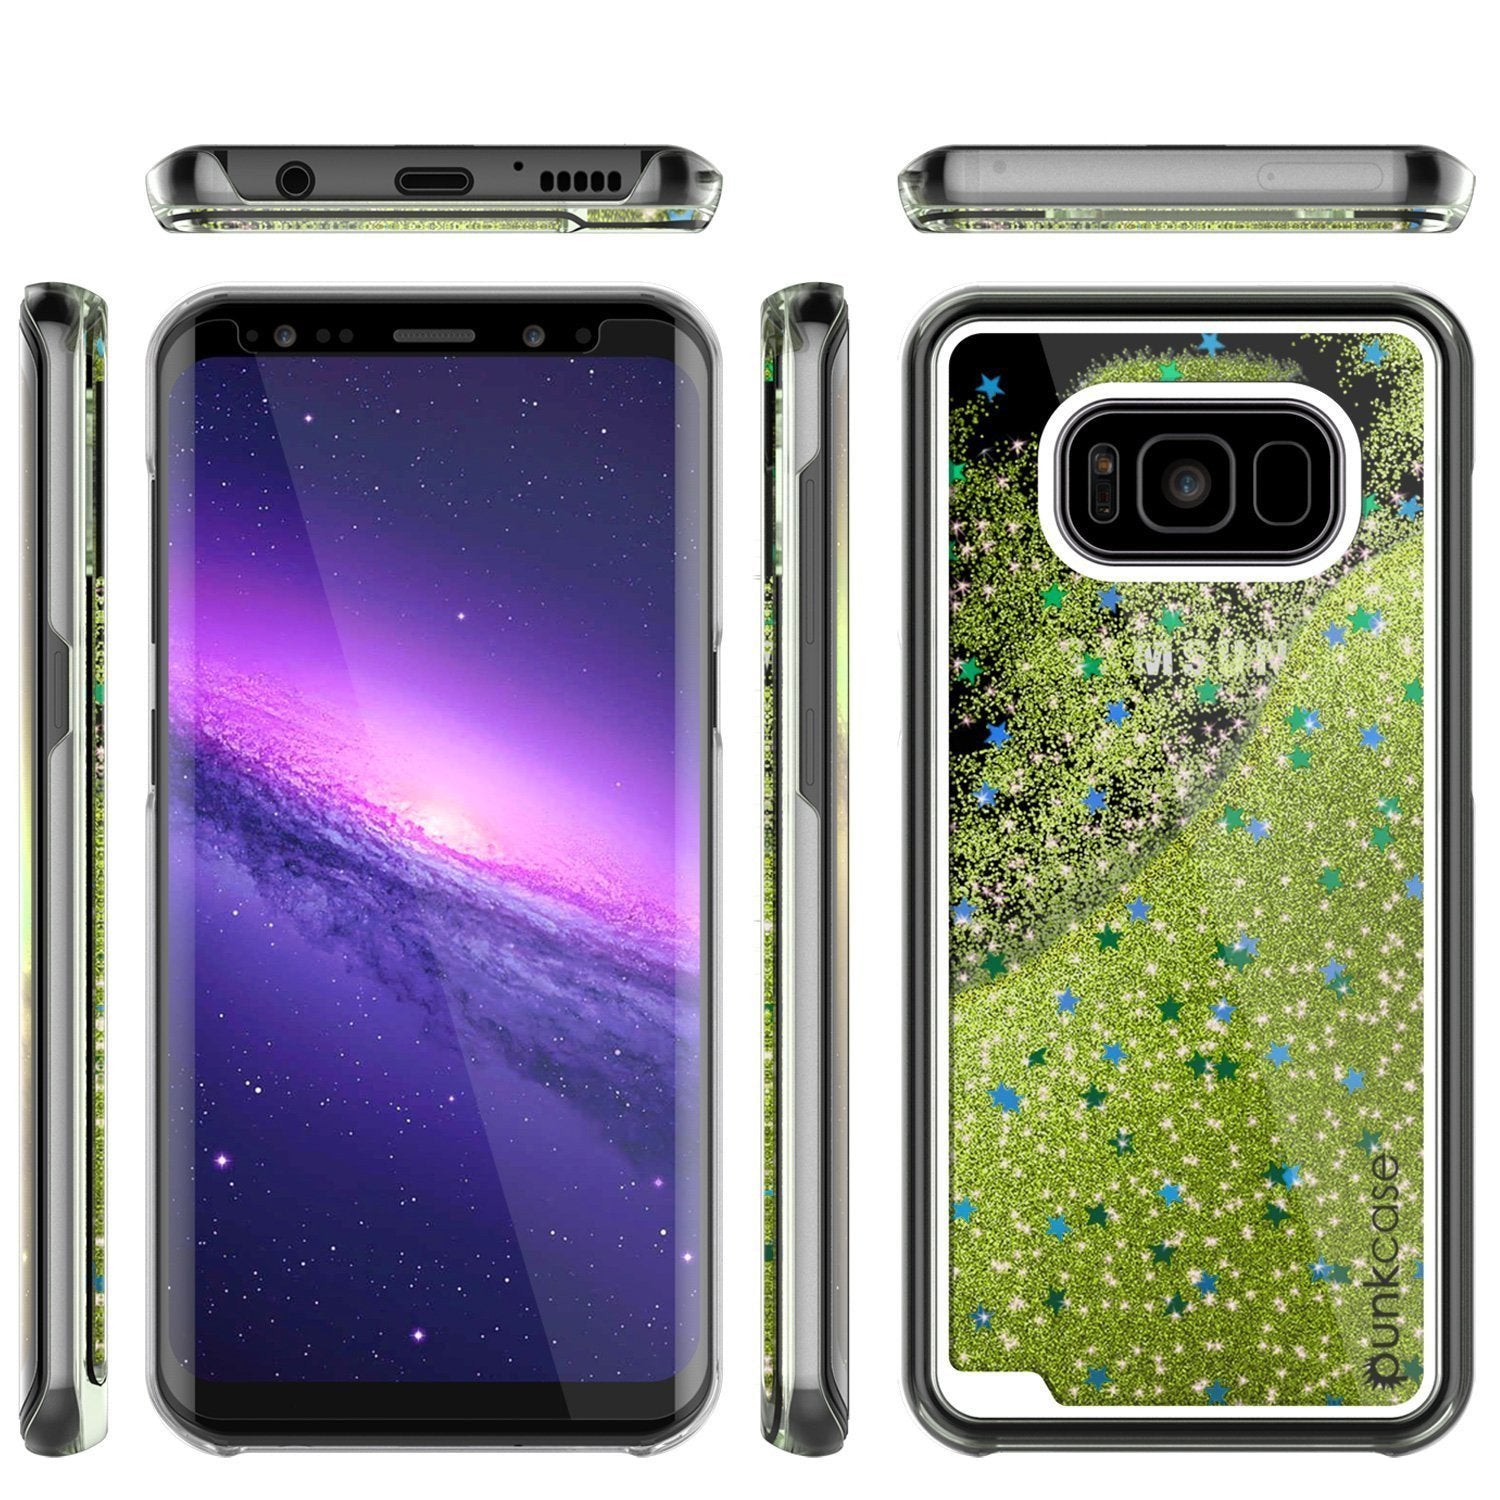 Galaxy S8 Case, Punkcase [Liquid Series] Protective Dual Layer Floating Glitter Cover with lots of Bling & Sparkle + PunkShield Screen Protector for Samsung S8 [Light Green] - PunkCase NZ